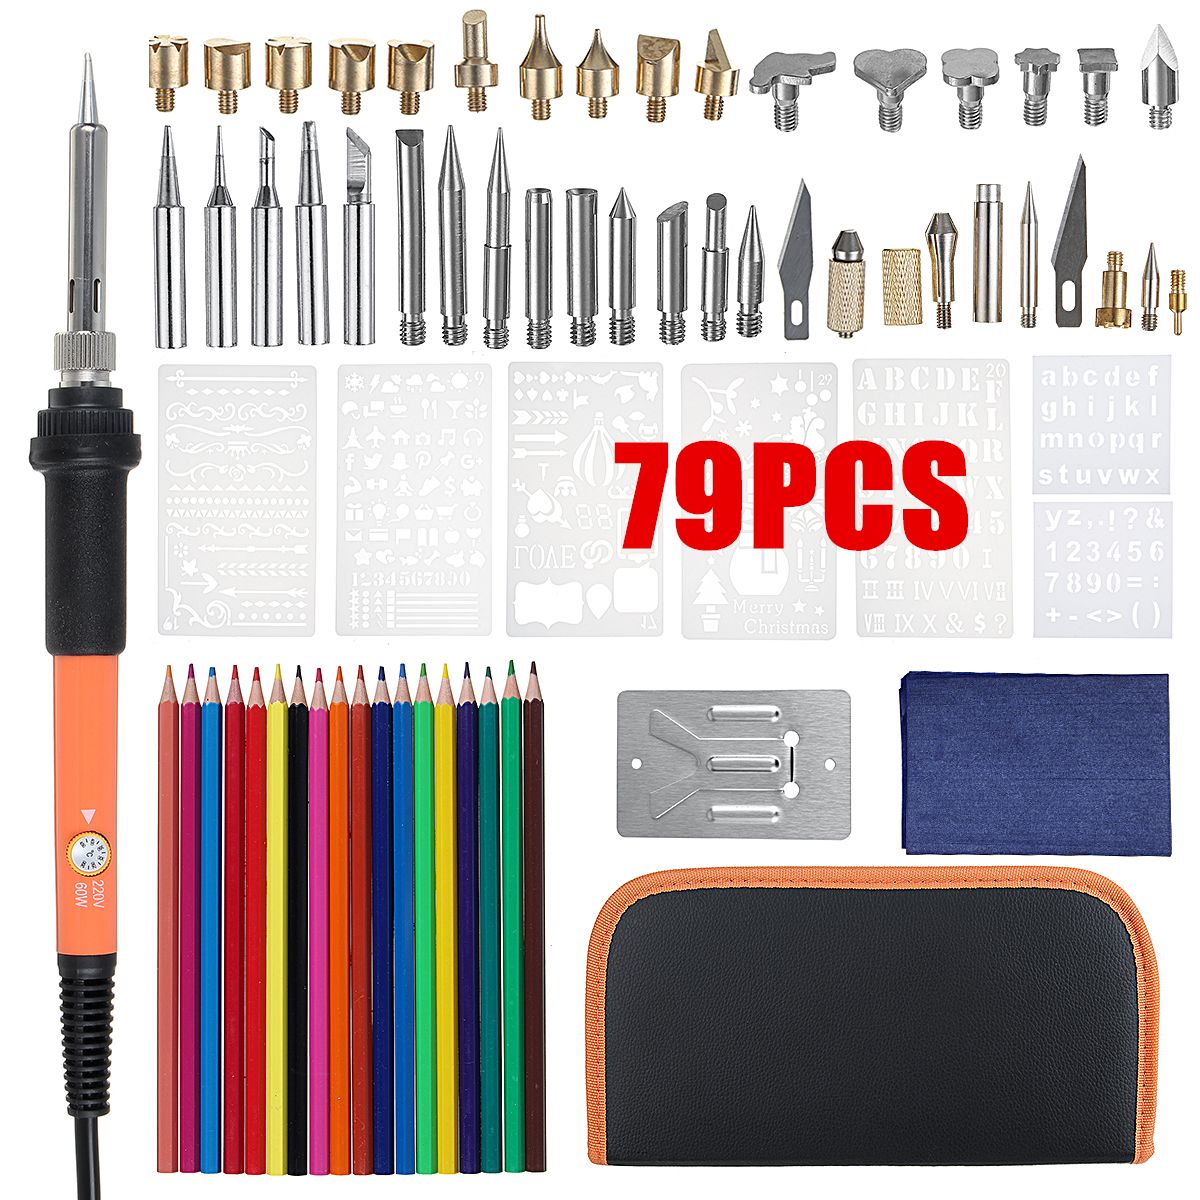 79PcsSet-Wood-Burning-Pen-Tips-Stencil-Soldering-Iron-Tools-Pyrography-Craft-Kit-Electric-Soldering--1629100